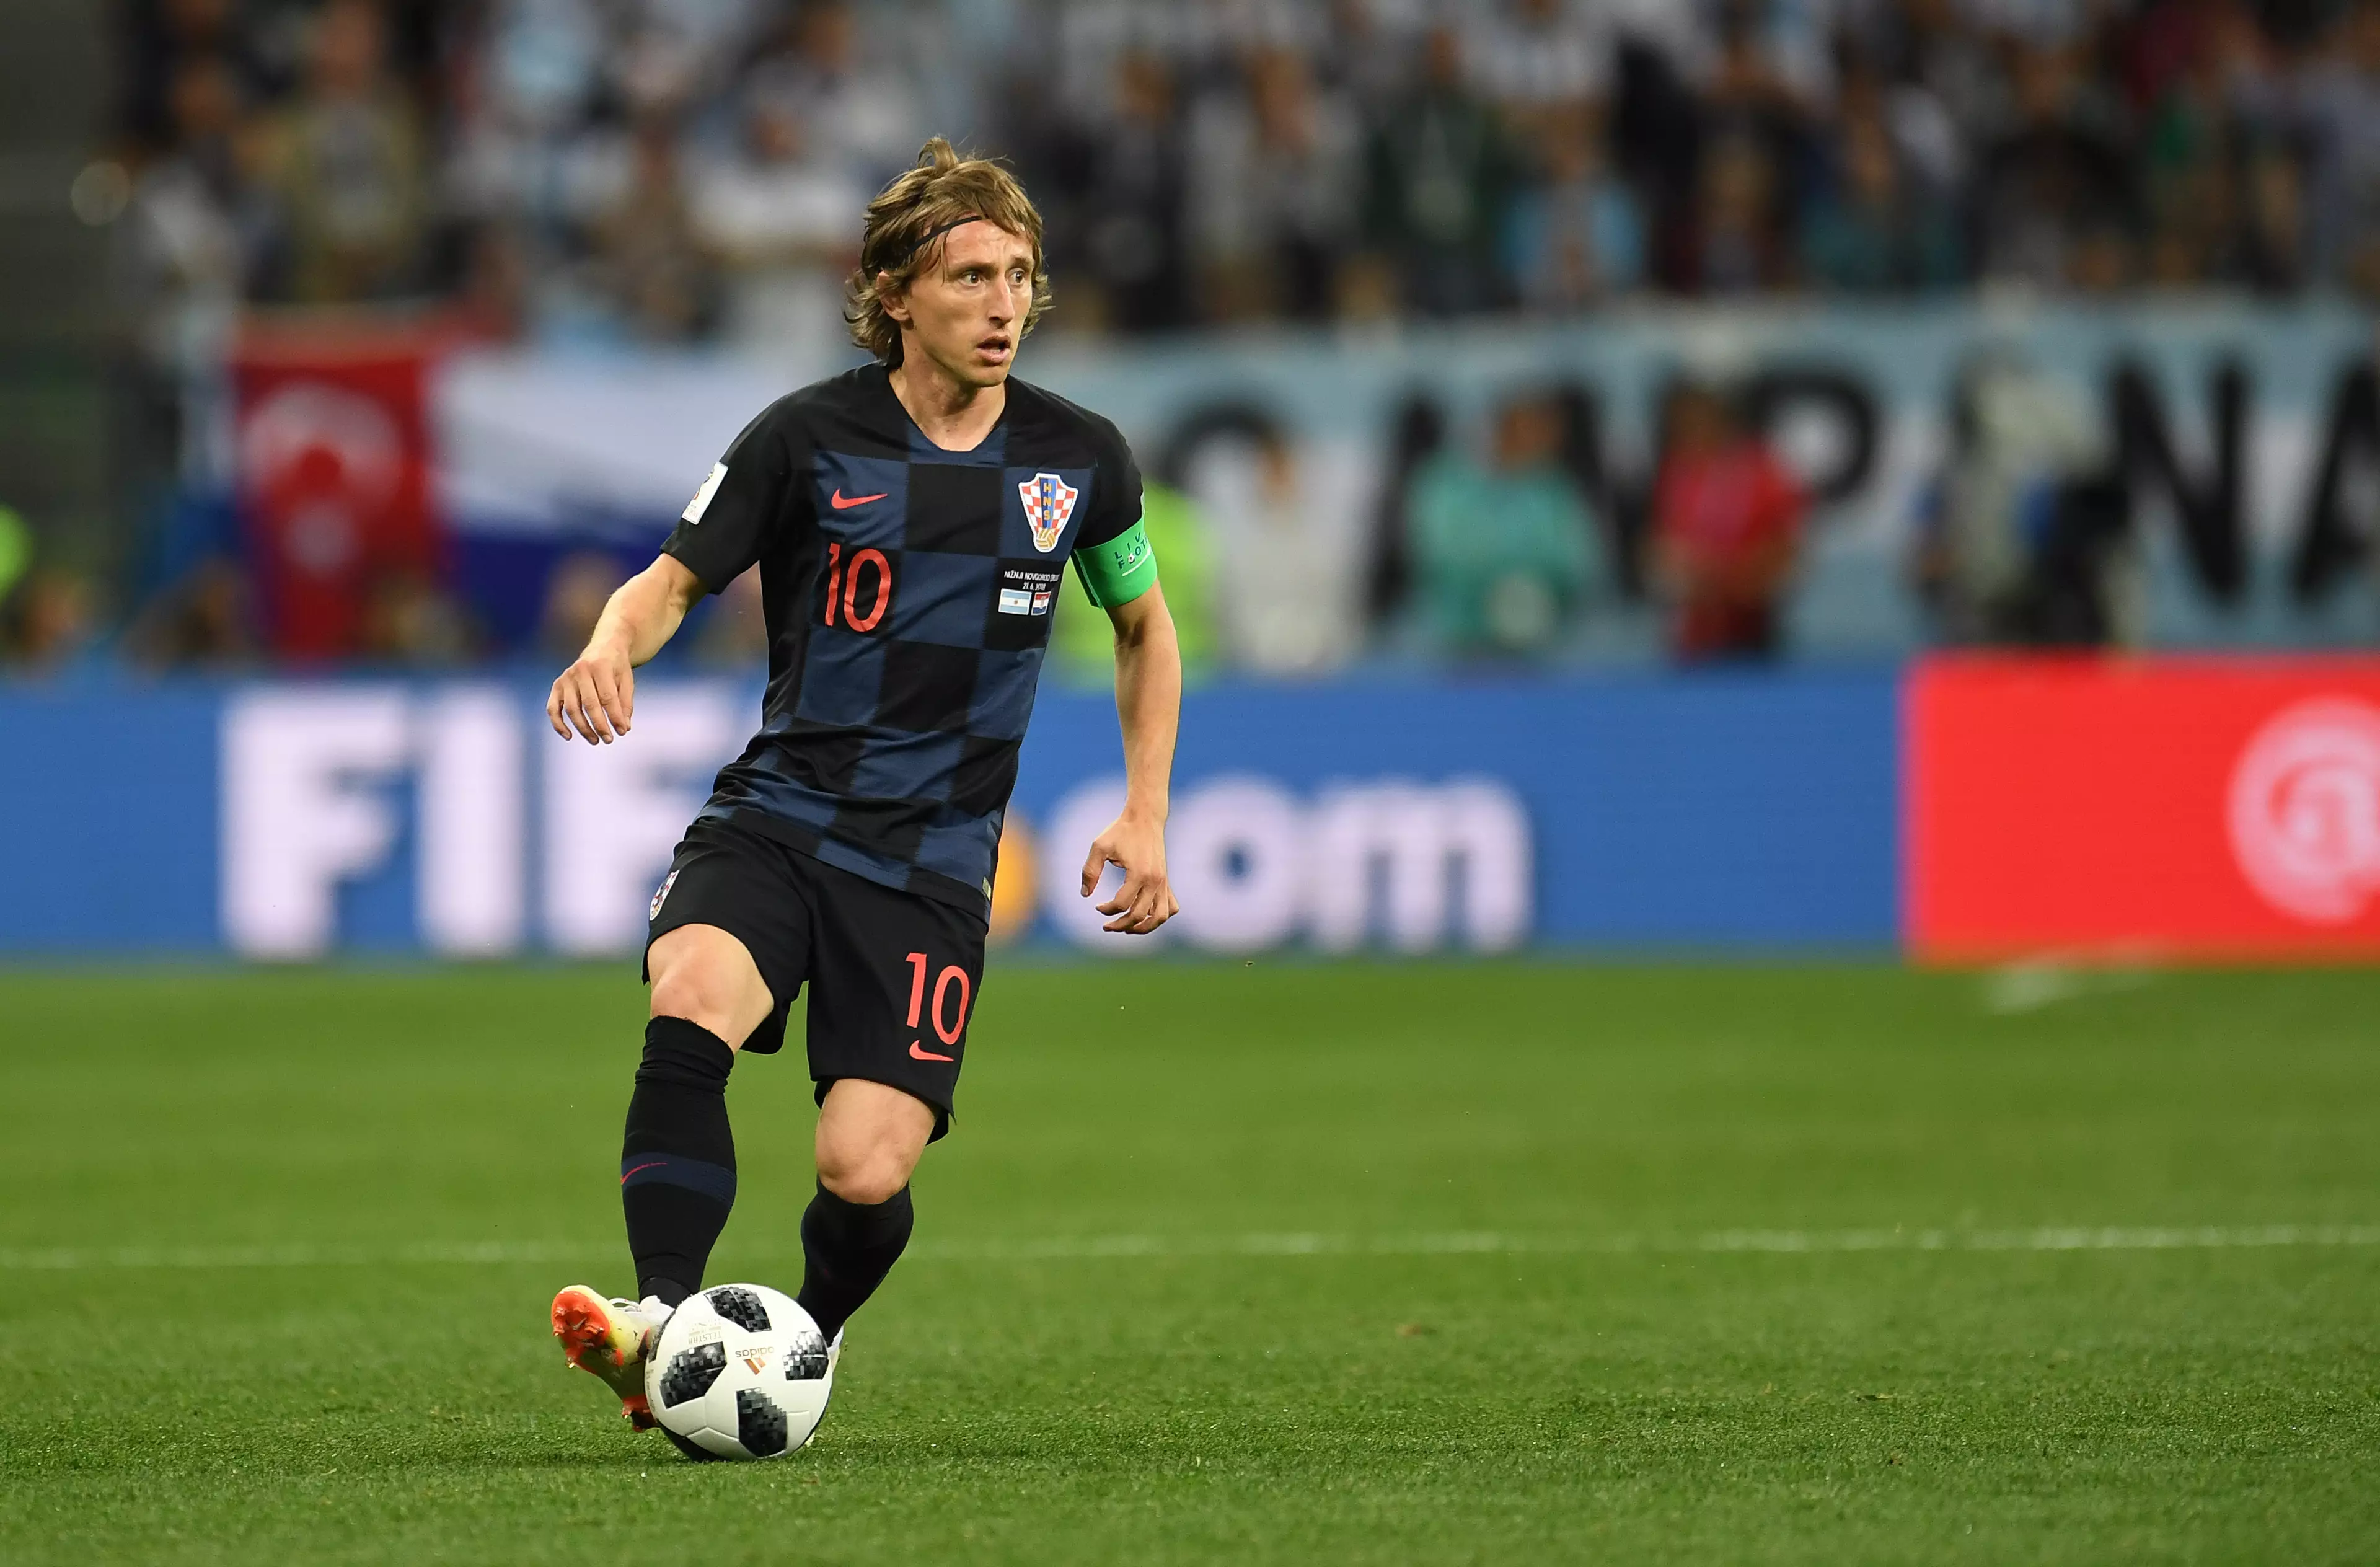 Fellow countryman Modric is a big part of Kovacic's frustrations. Image: PA Images